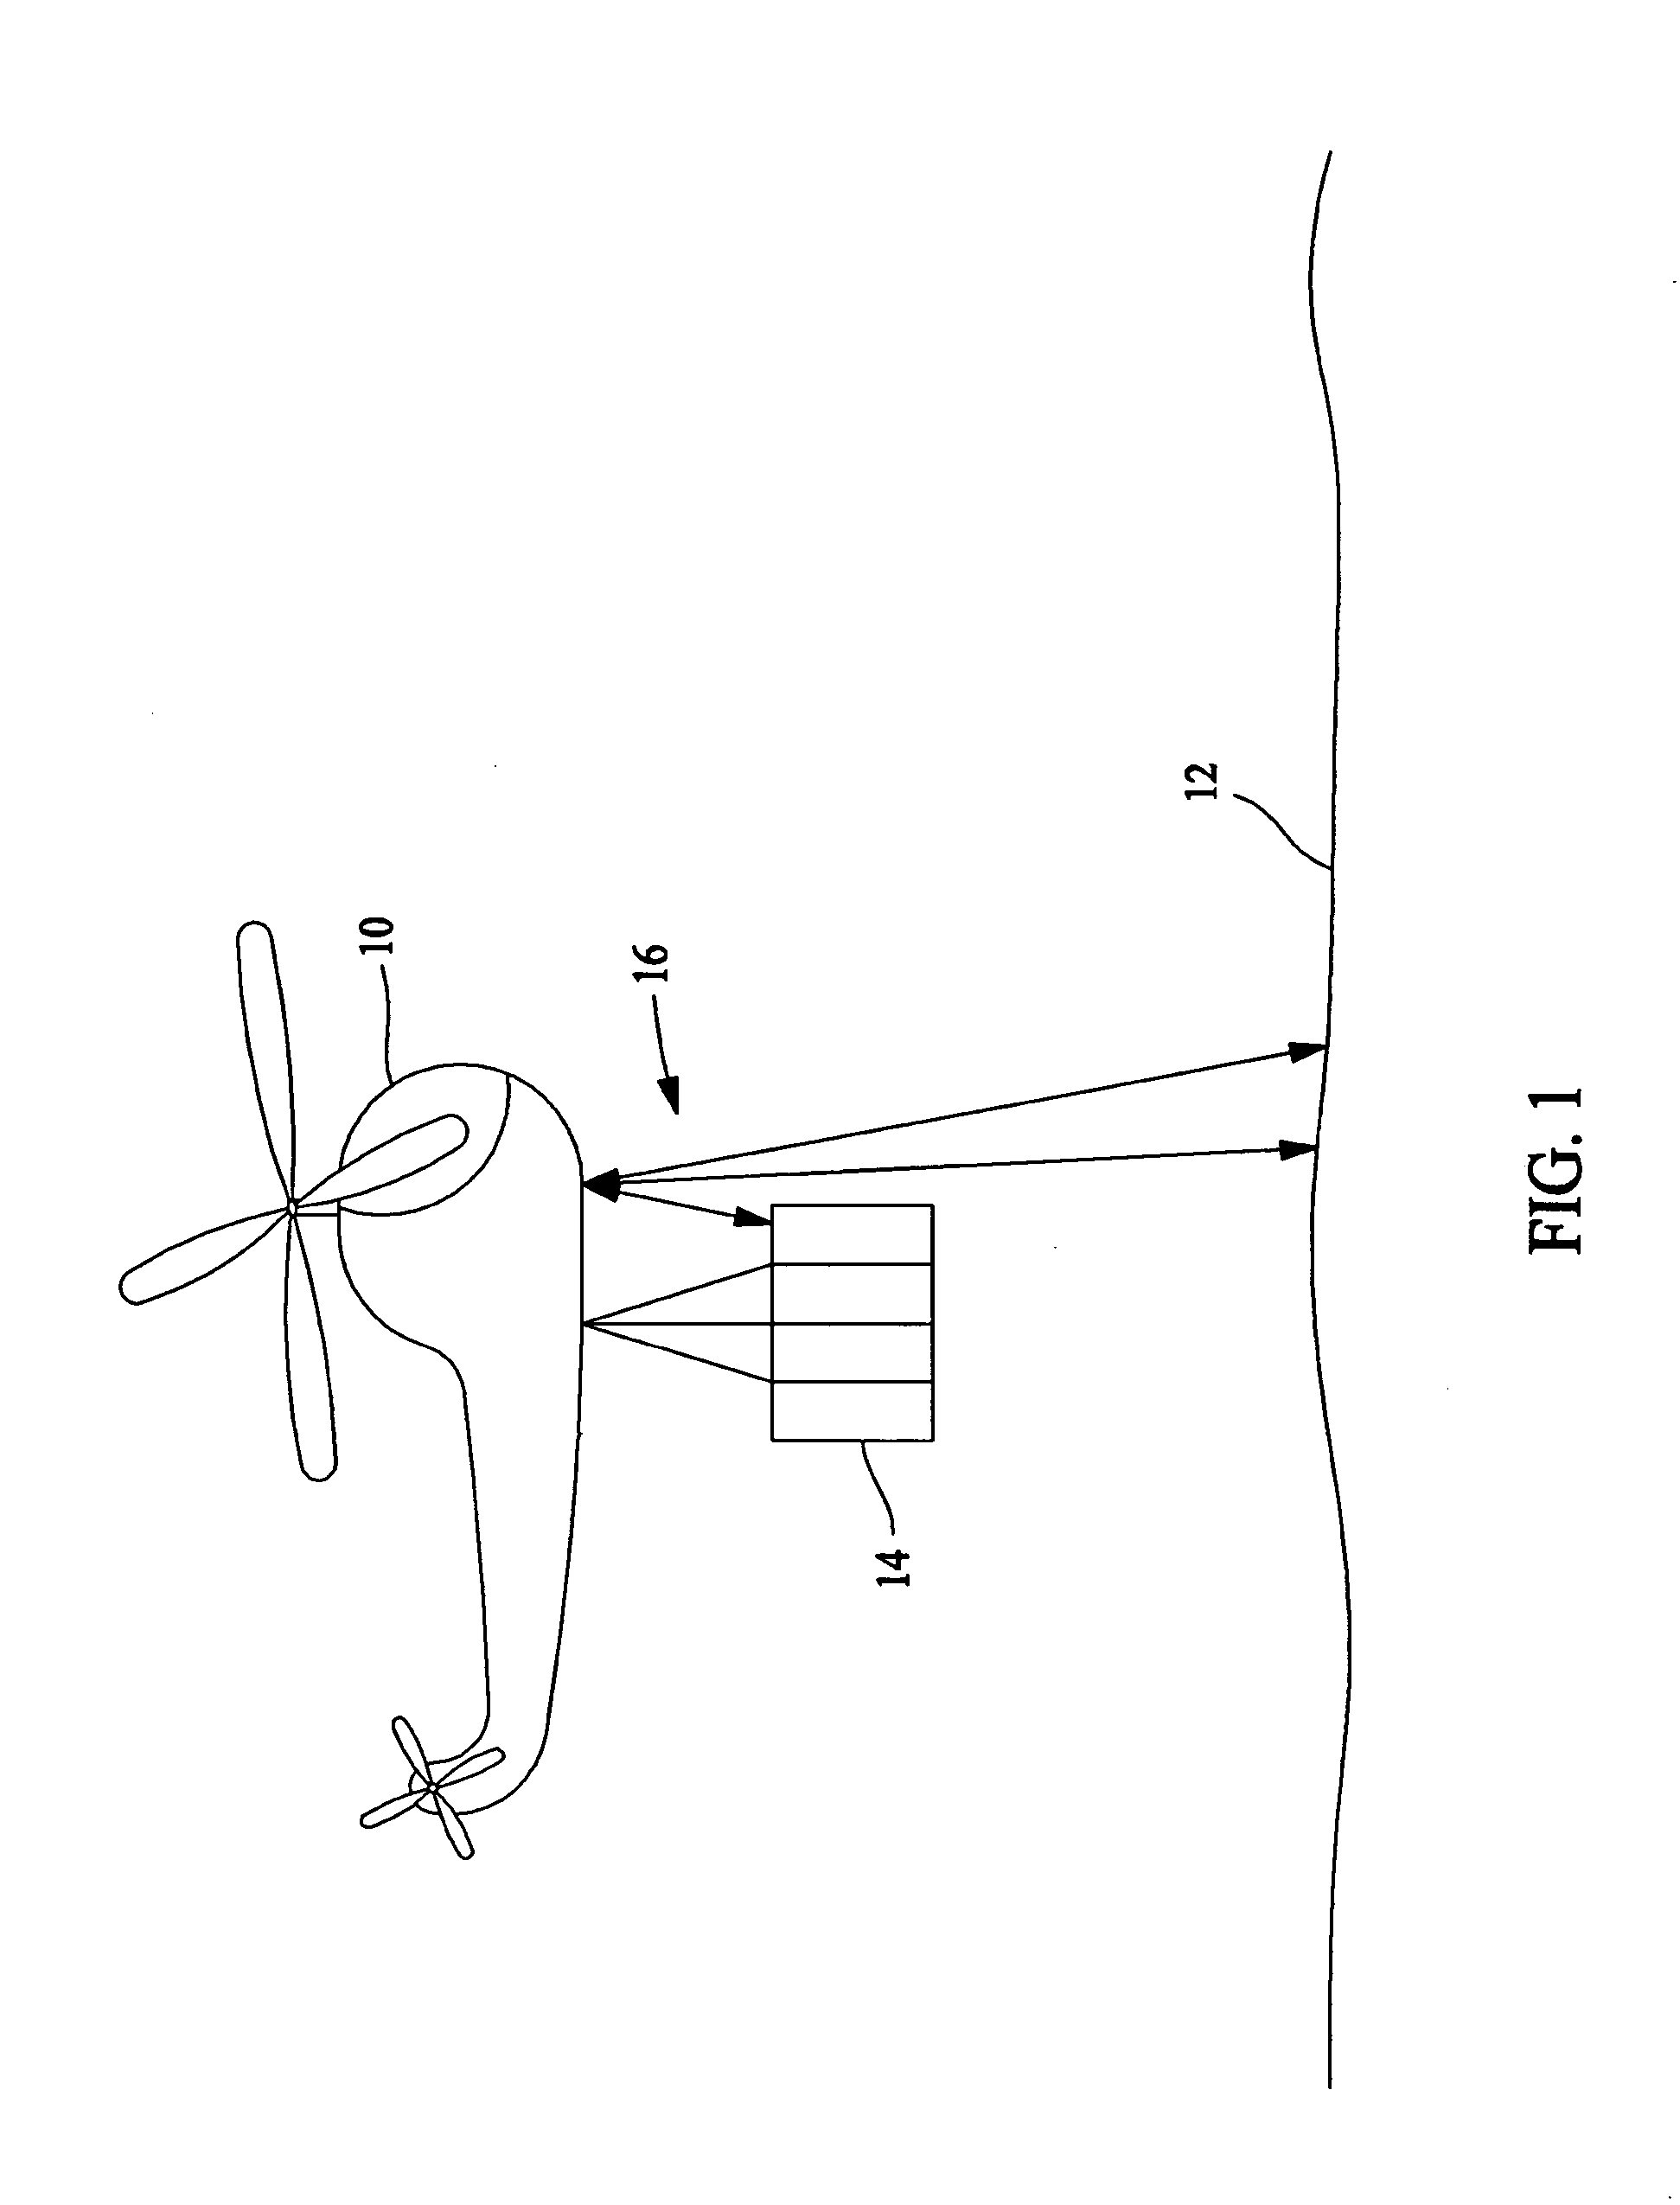 Radar altimeter for helicopter load carrying operations